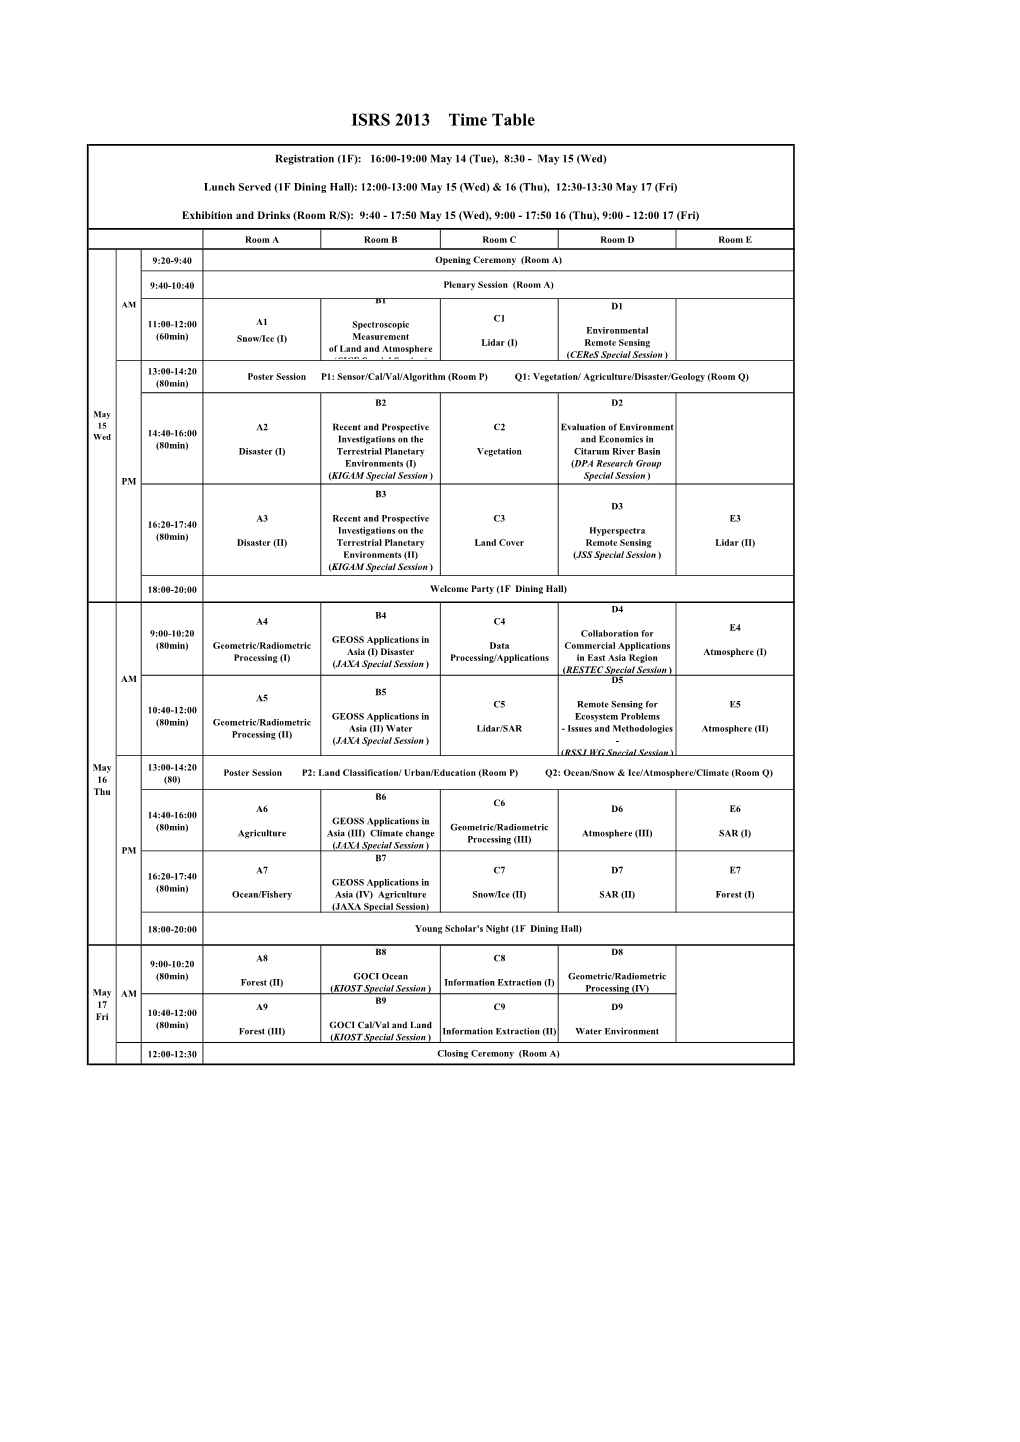 ISRS 2013 Time Table